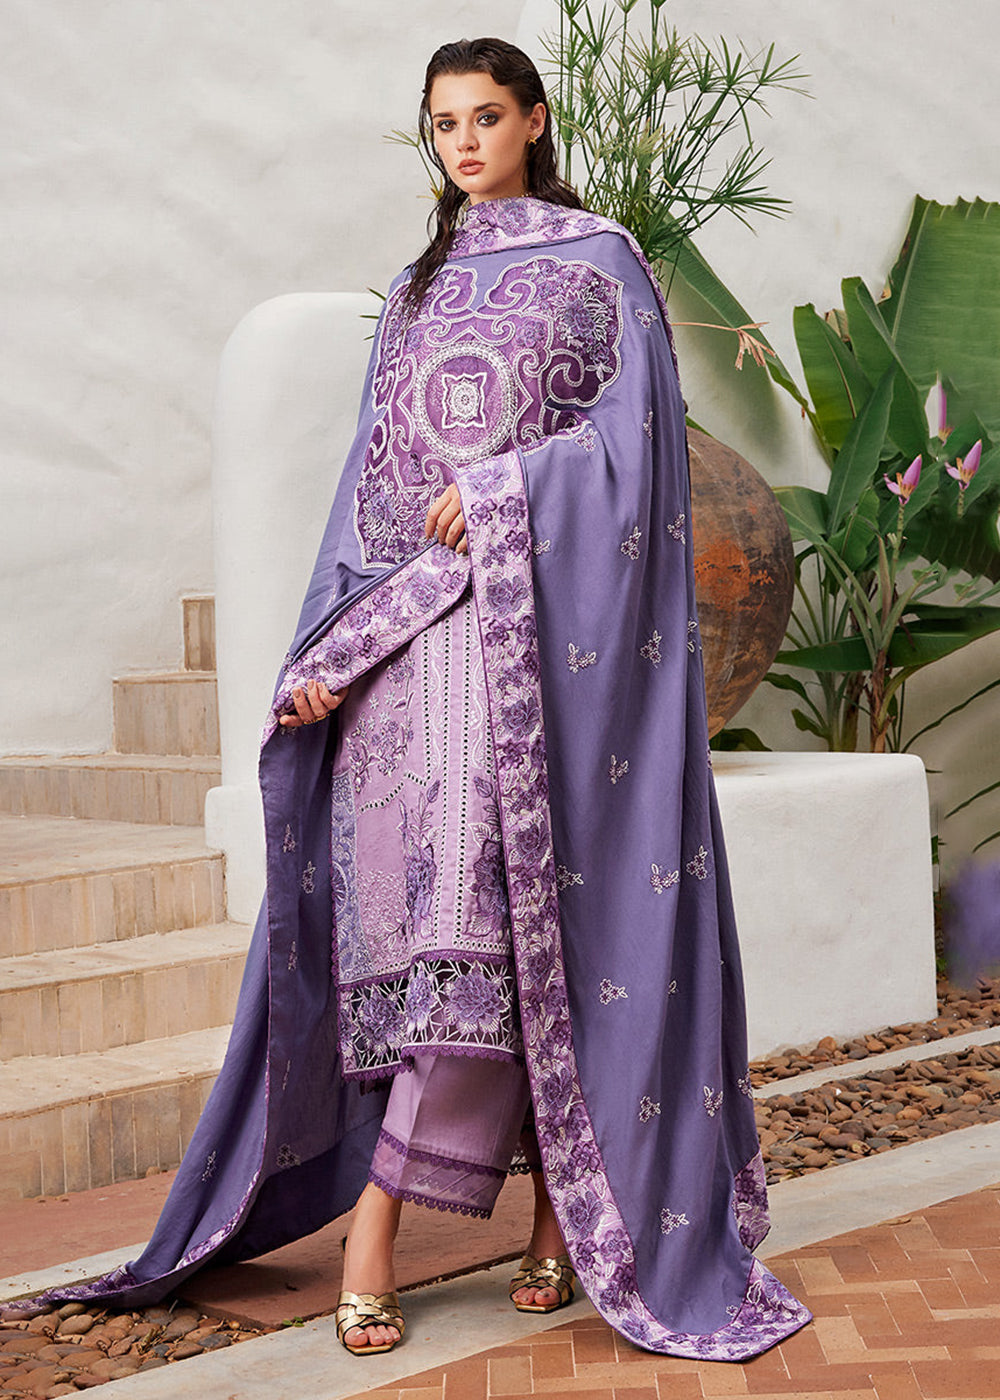 Buy Now Moroccan Dreams '23 by Mushq - ADILAH at Empress Online in USA, UK, Canada & Worldwide at Empress Clothing. 